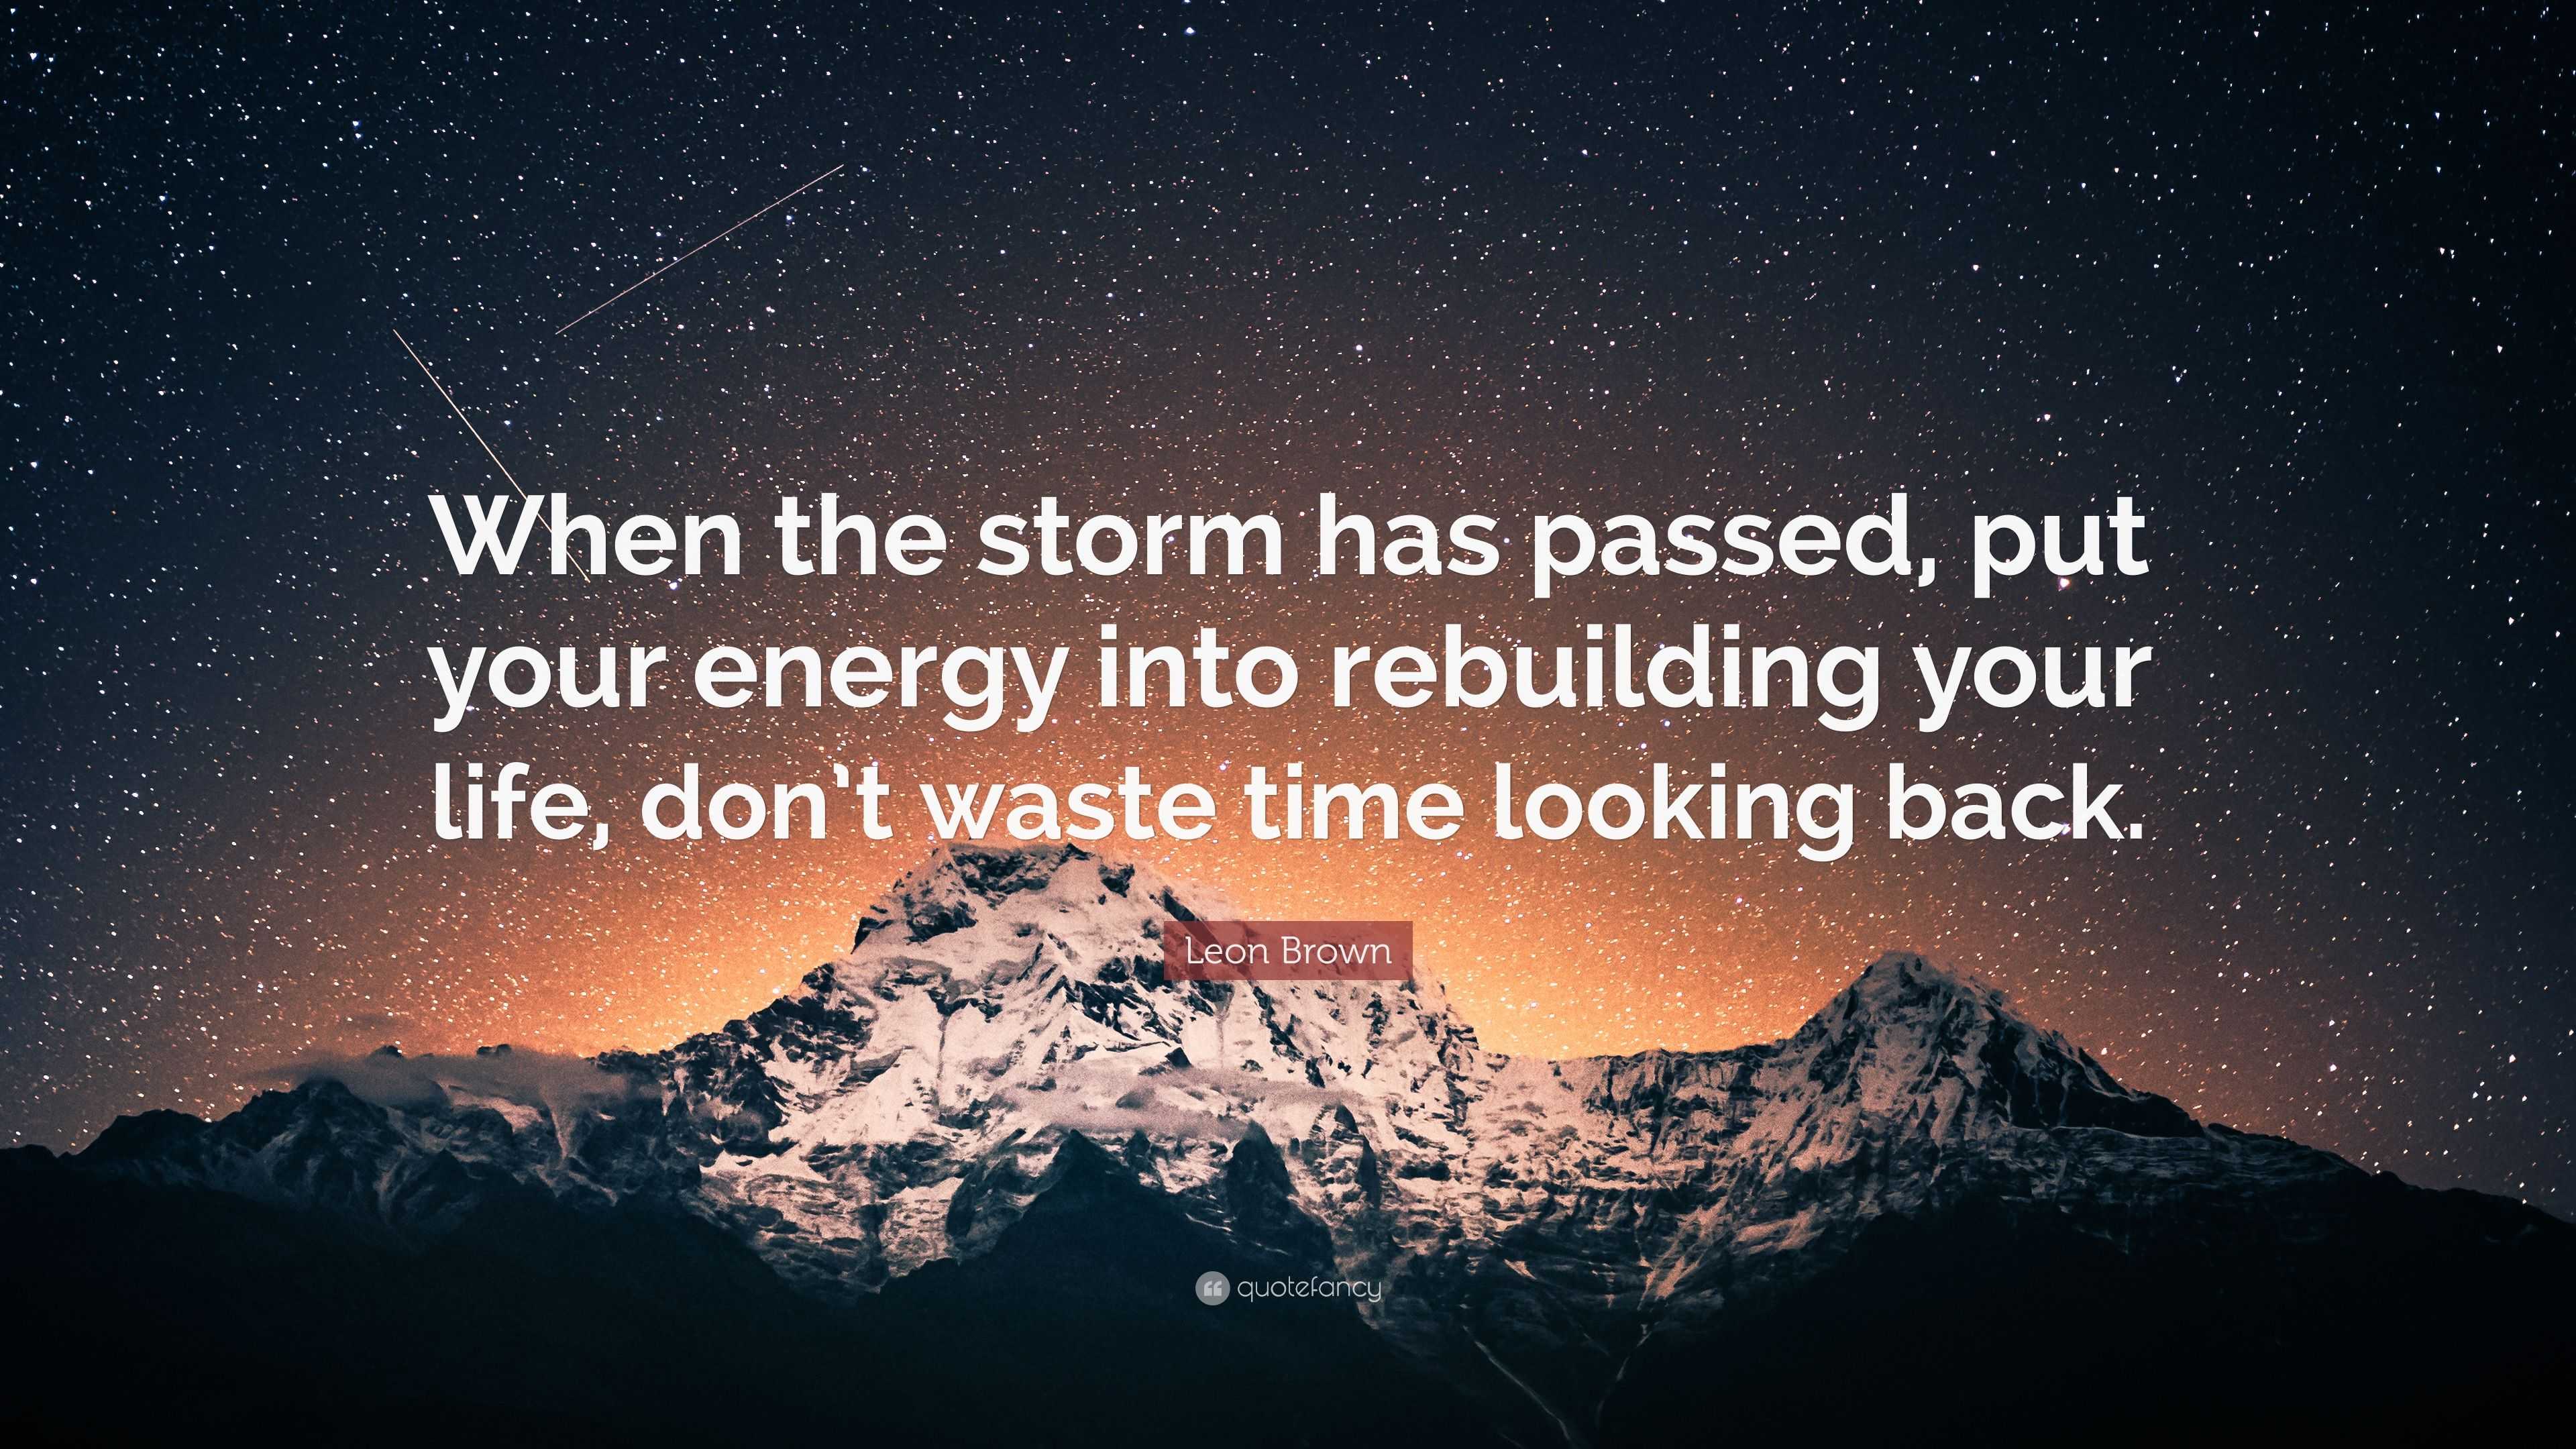 Leon Brown Quote “When the storm has passed put your energy into rebuilding